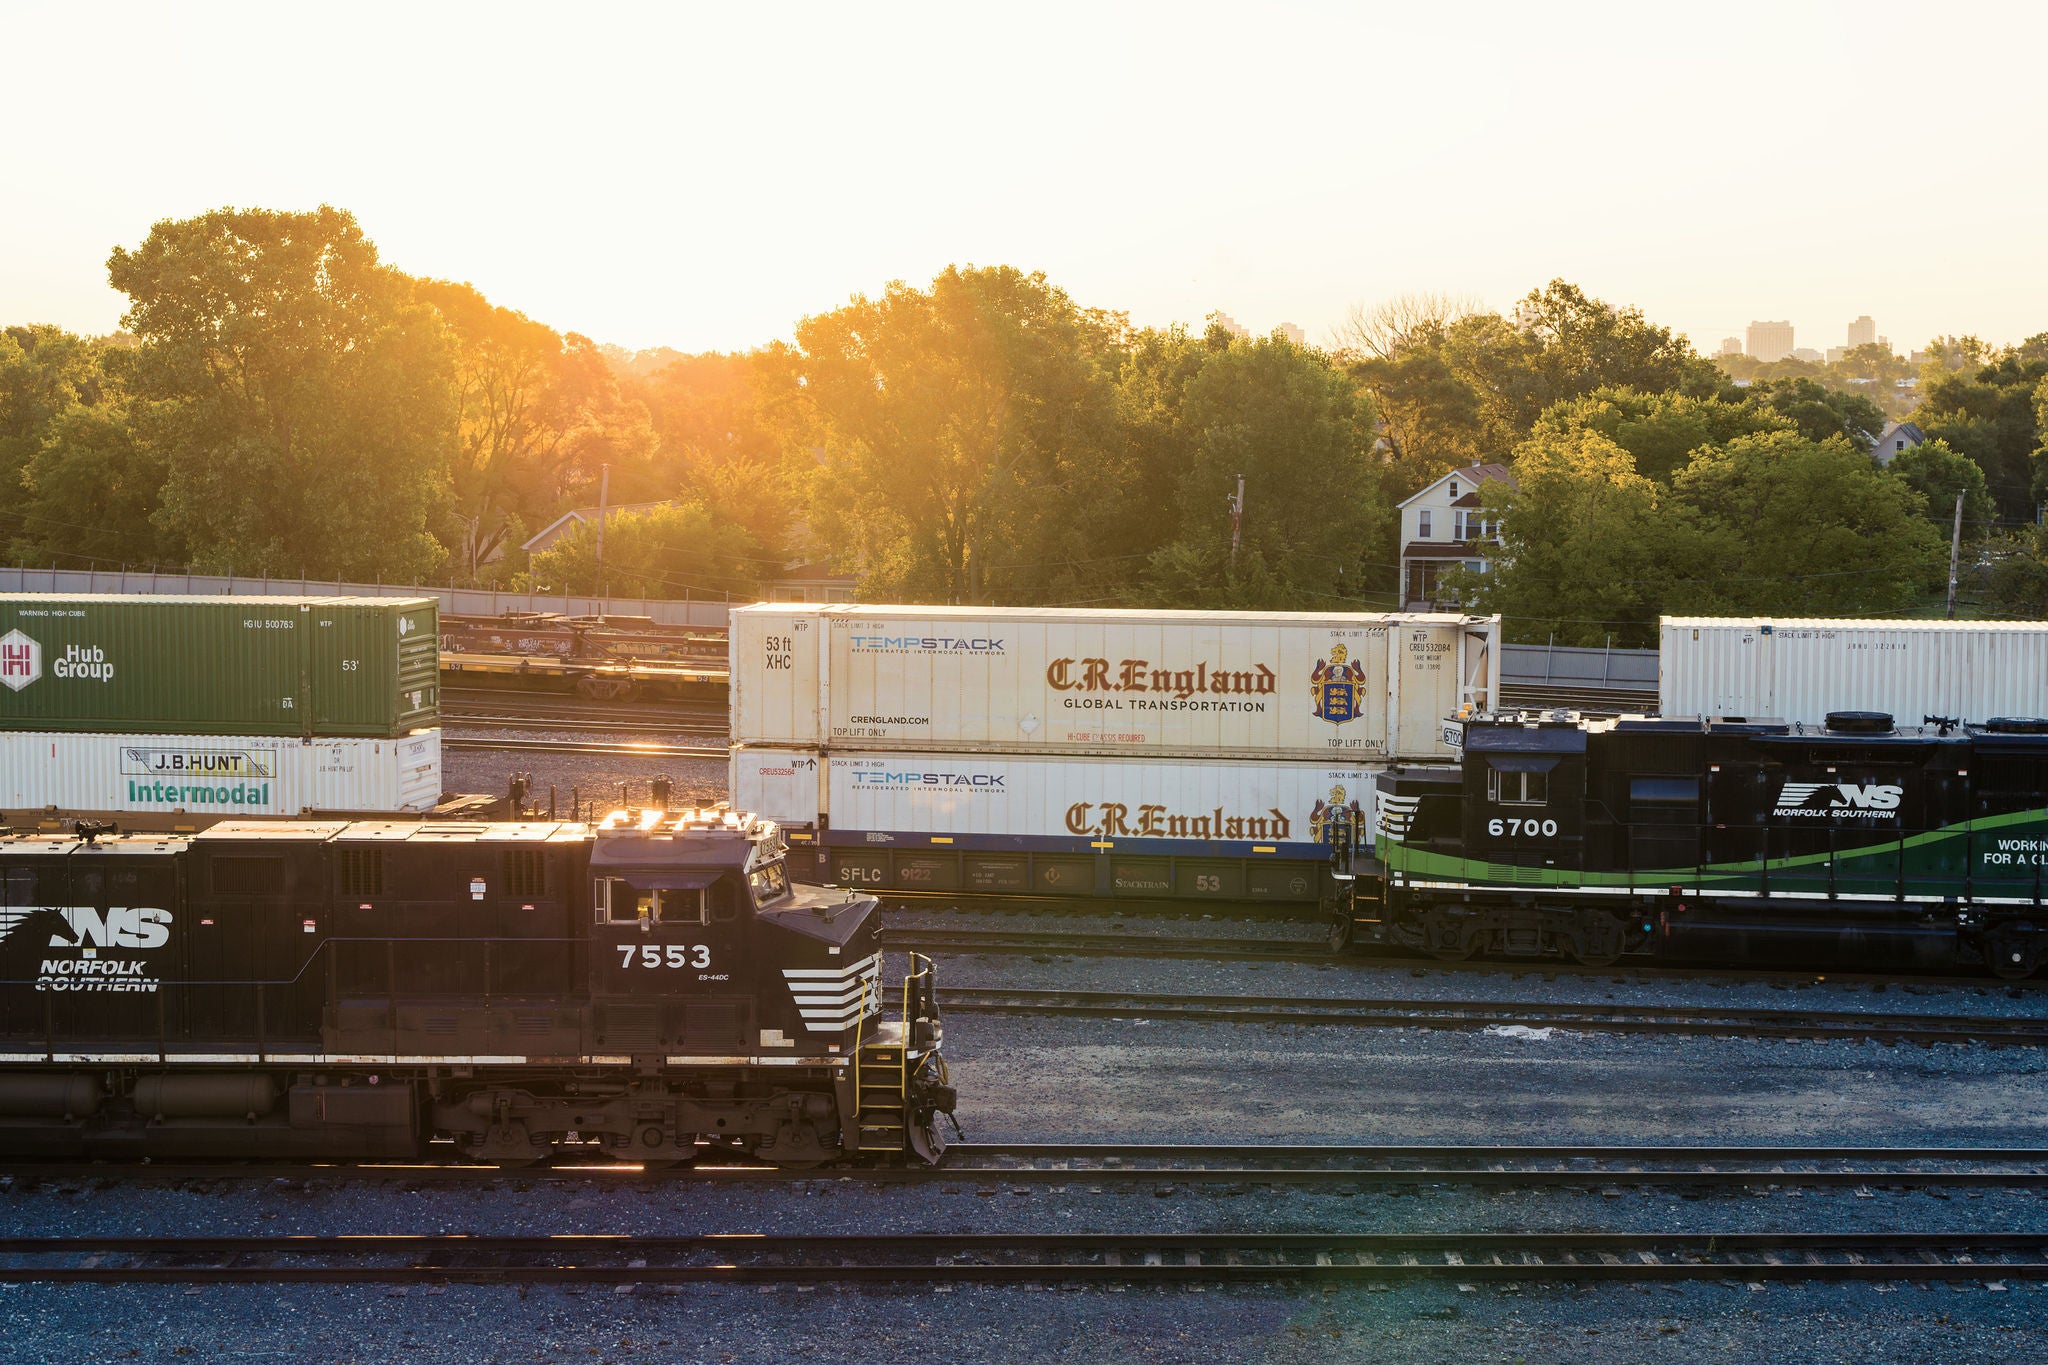 Two Norfolk Southern intermodal shipping trains heading in opposite directions on the company’s railway tracks